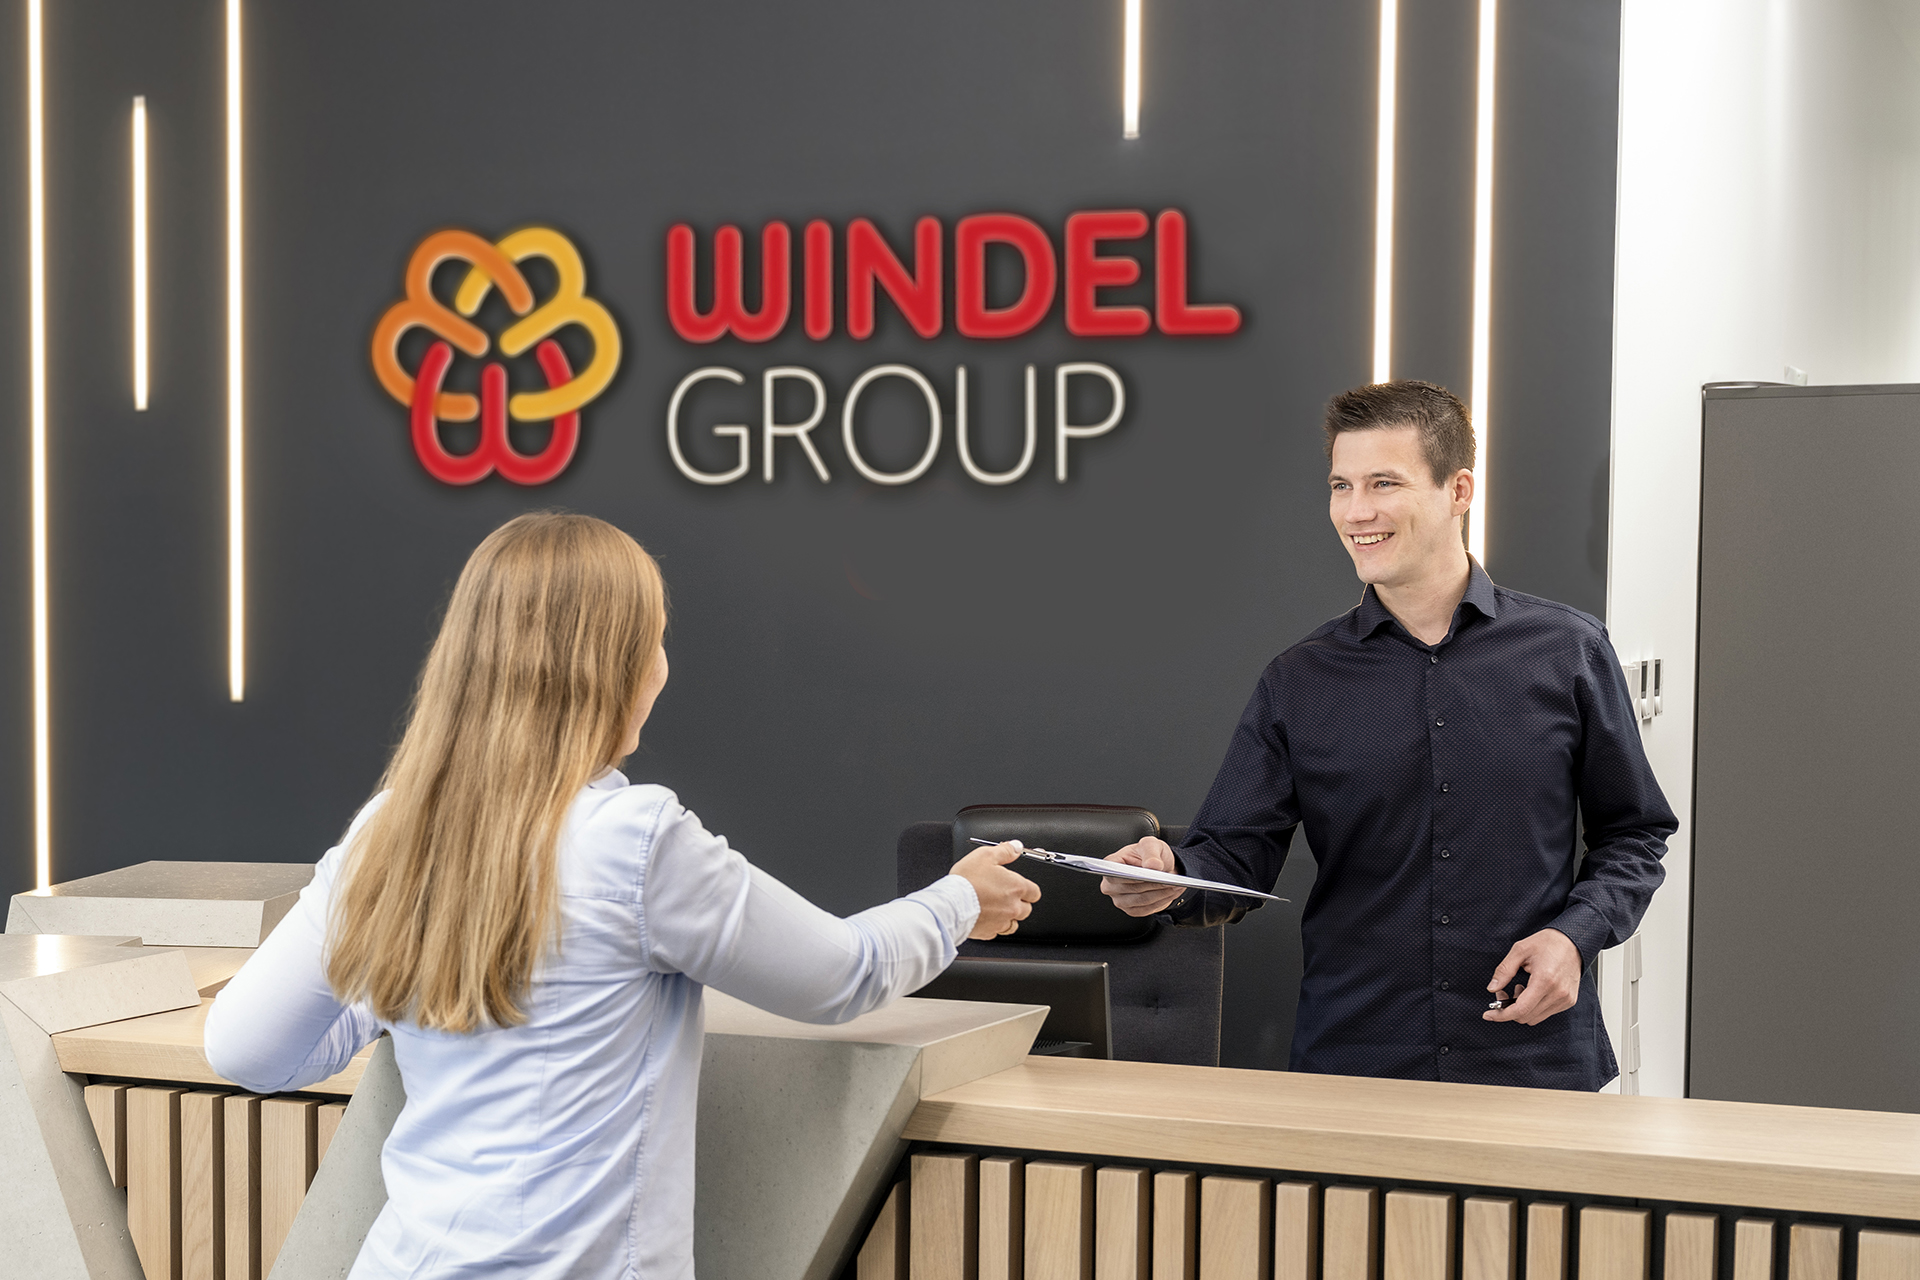 Contact the Windel Group